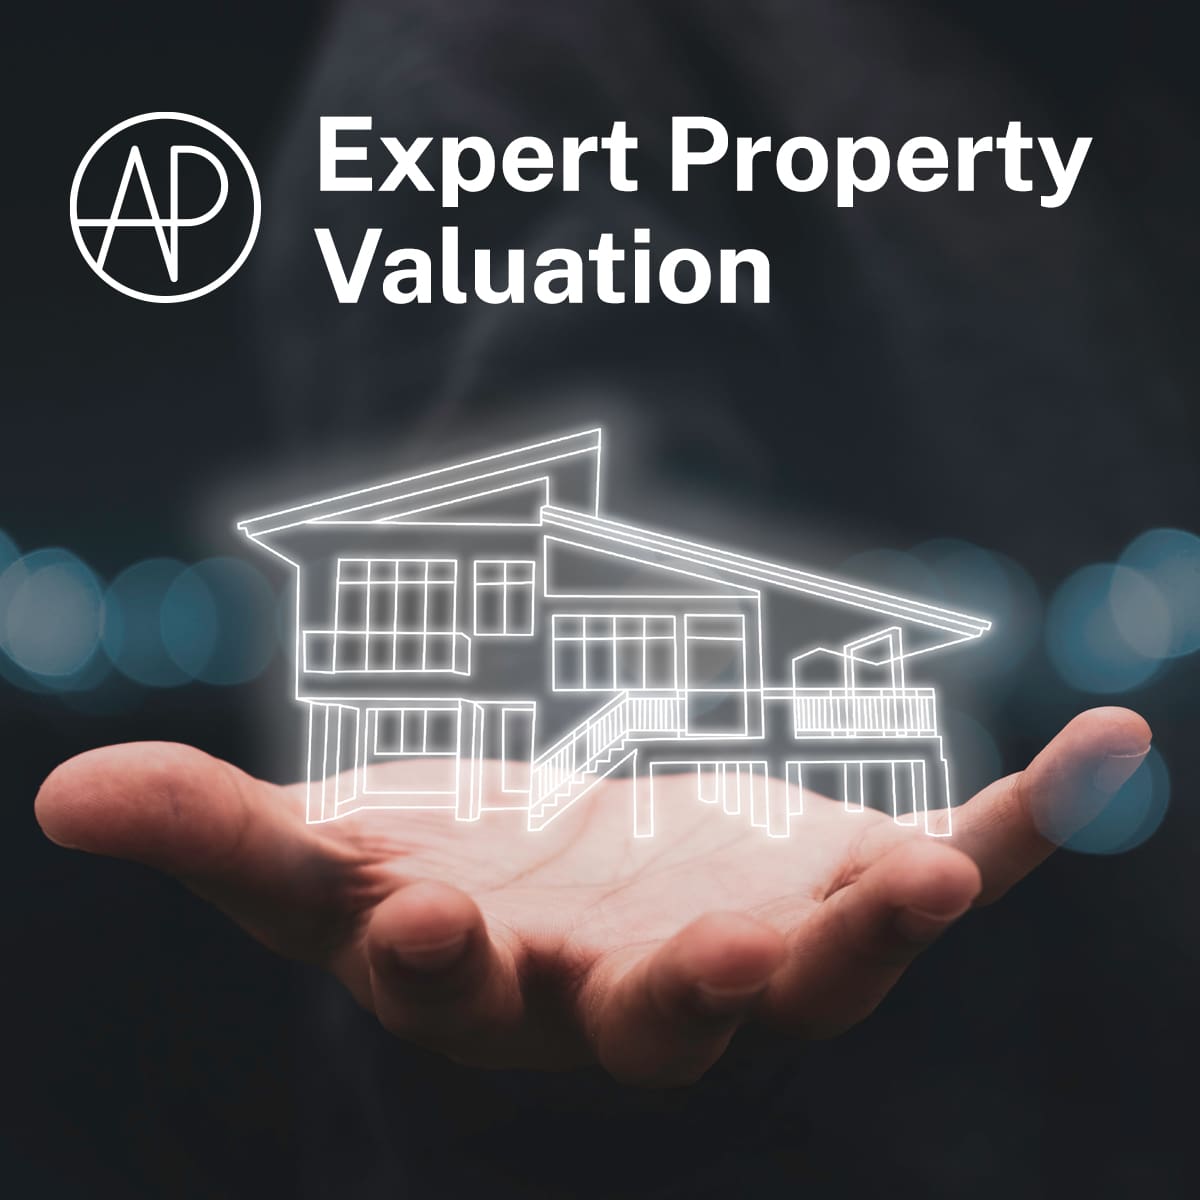 Expert property valuation